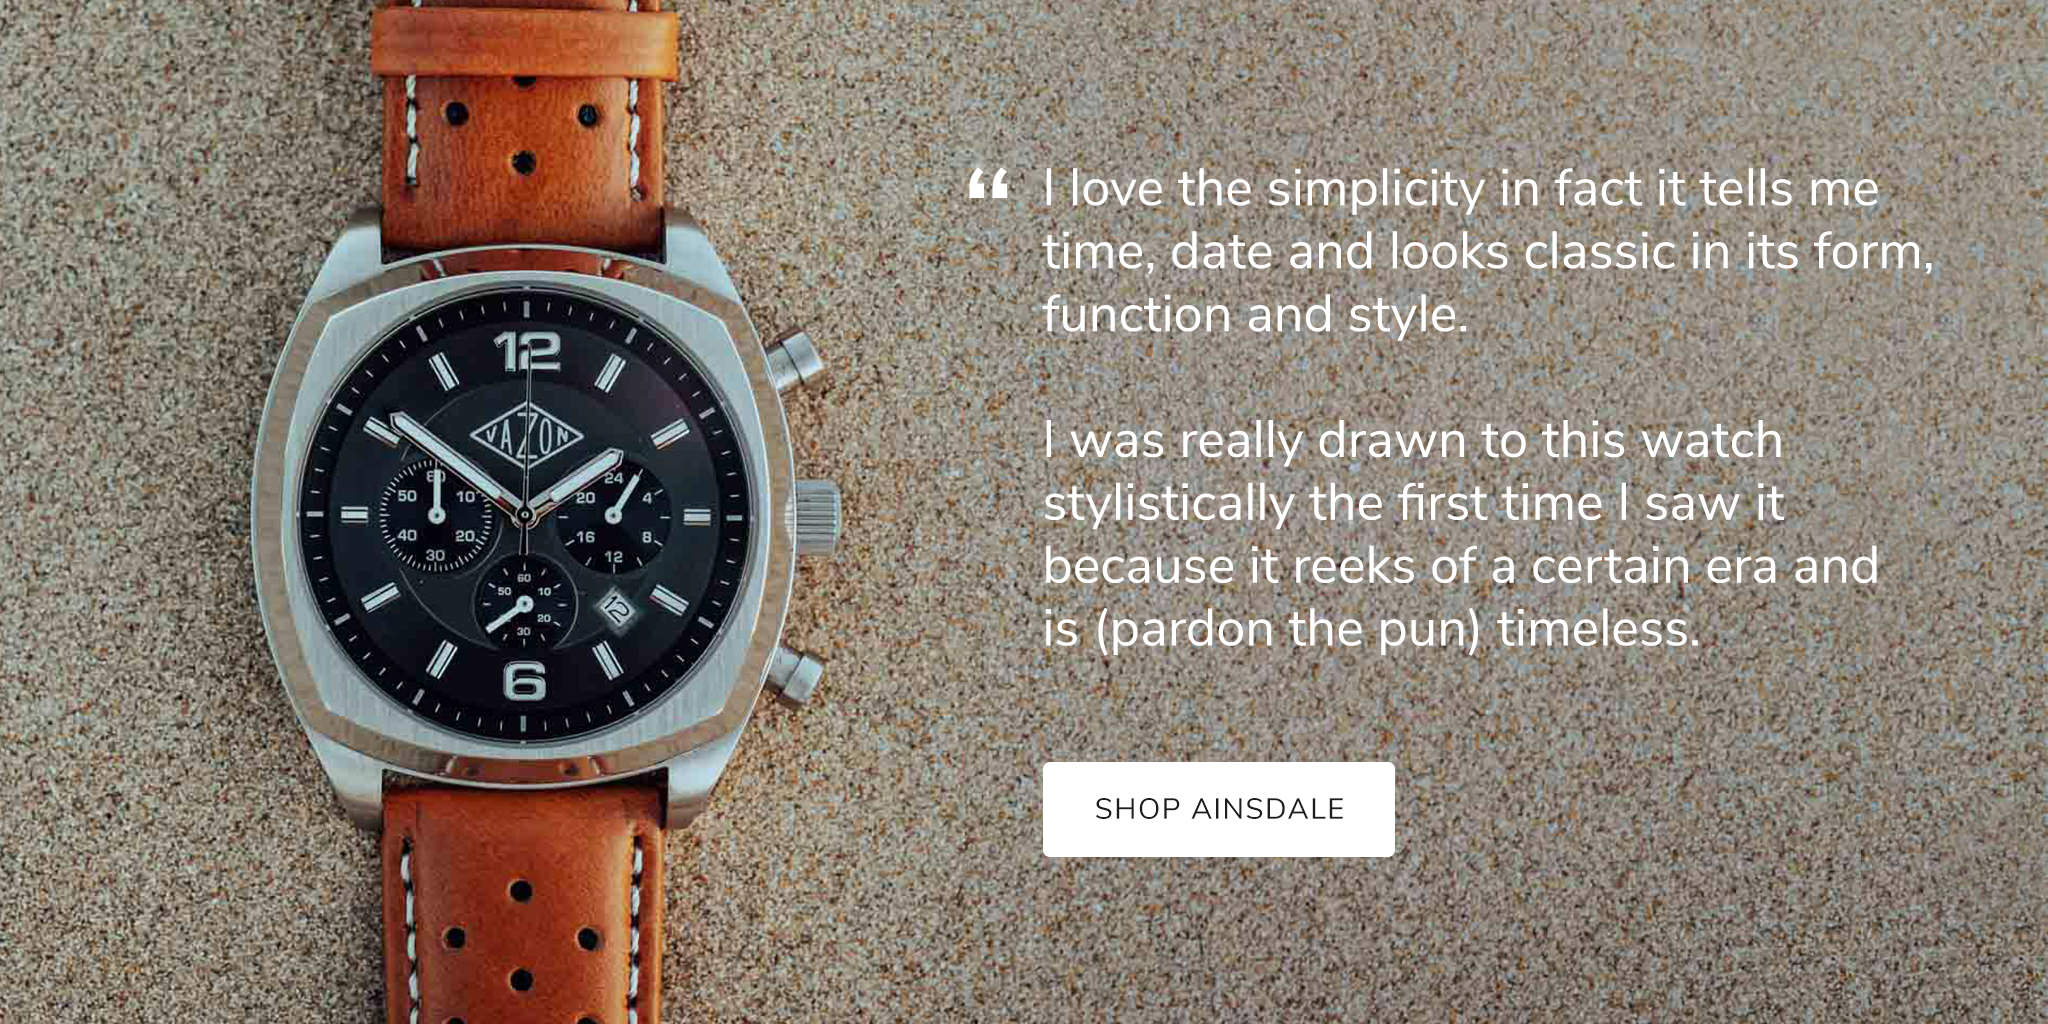 The Ainsdale Watch by Vazon Watches